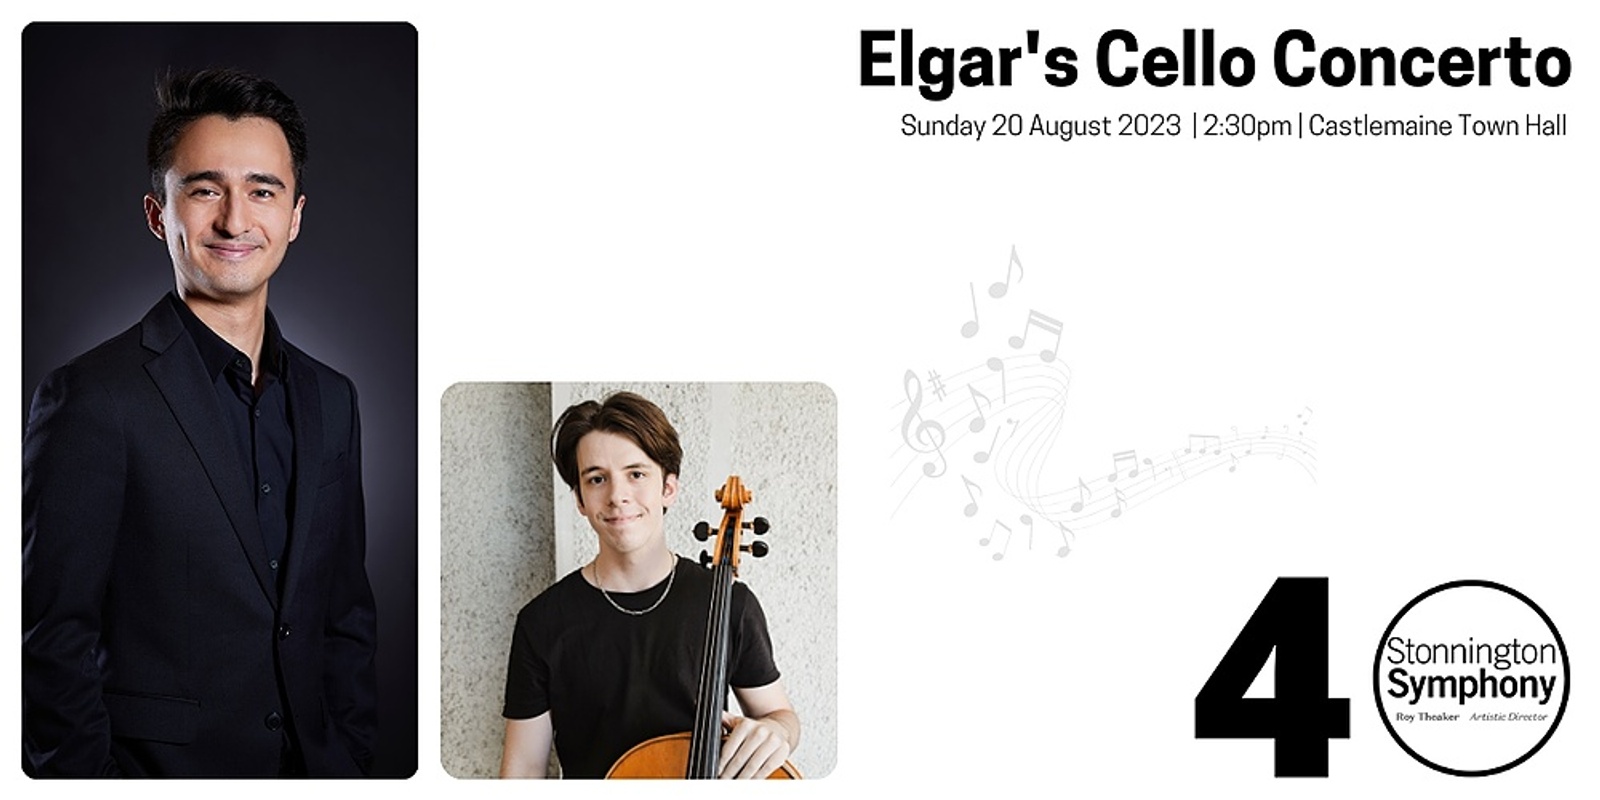 Banner image for Elgar's Cello Concerto at Castlemaine Town Hall